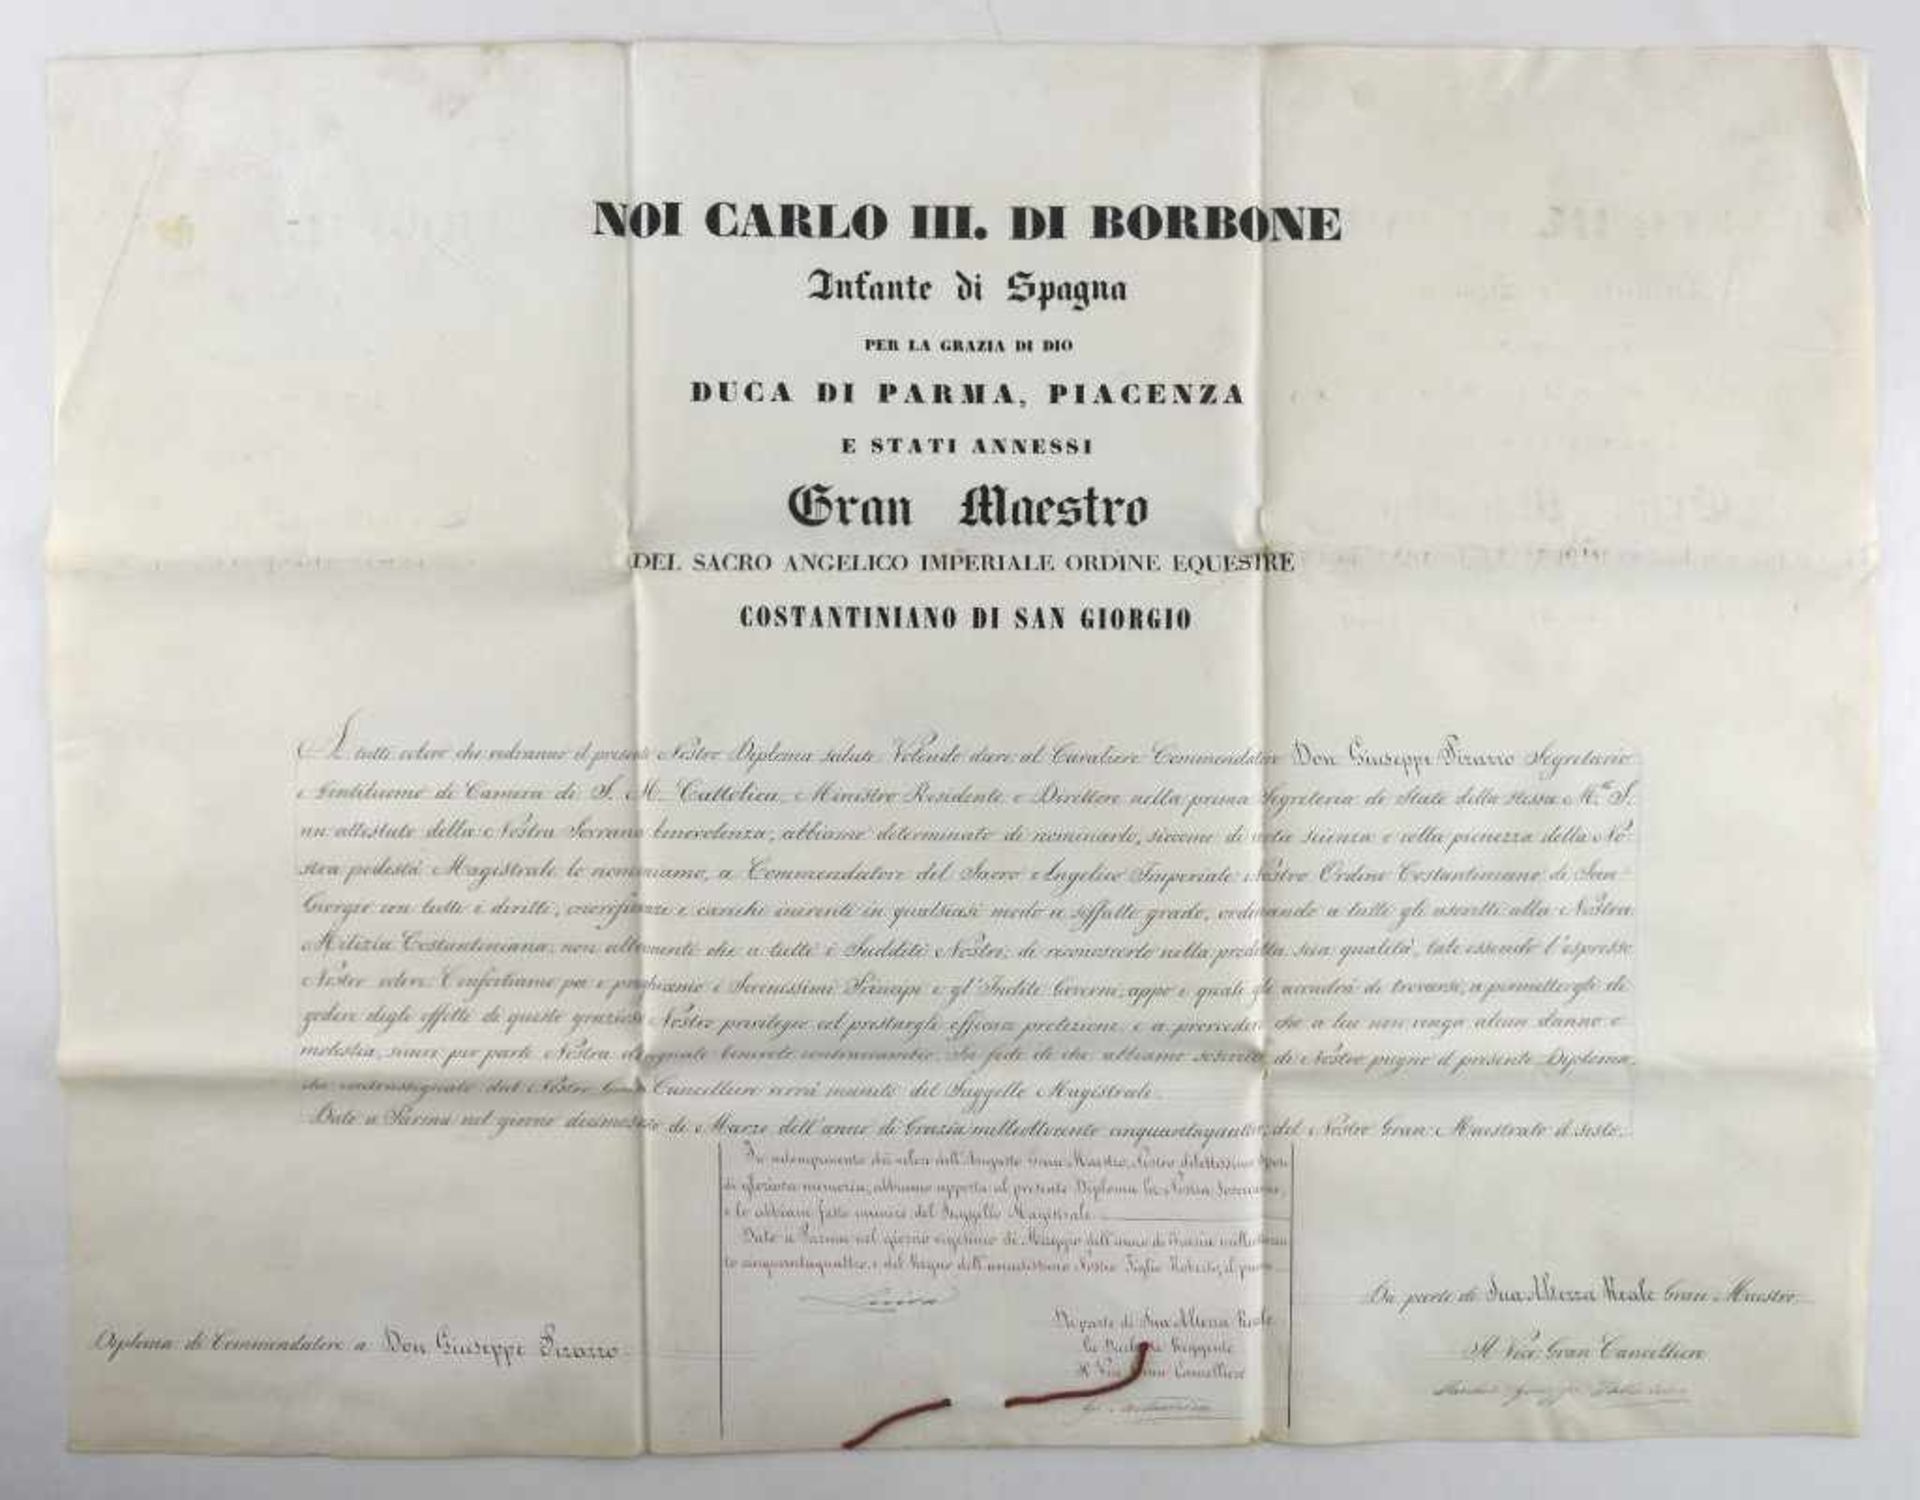 Italy (Parma) - Letter patent for a Commandeur of the Constantinian Order of Saint George dated 1854